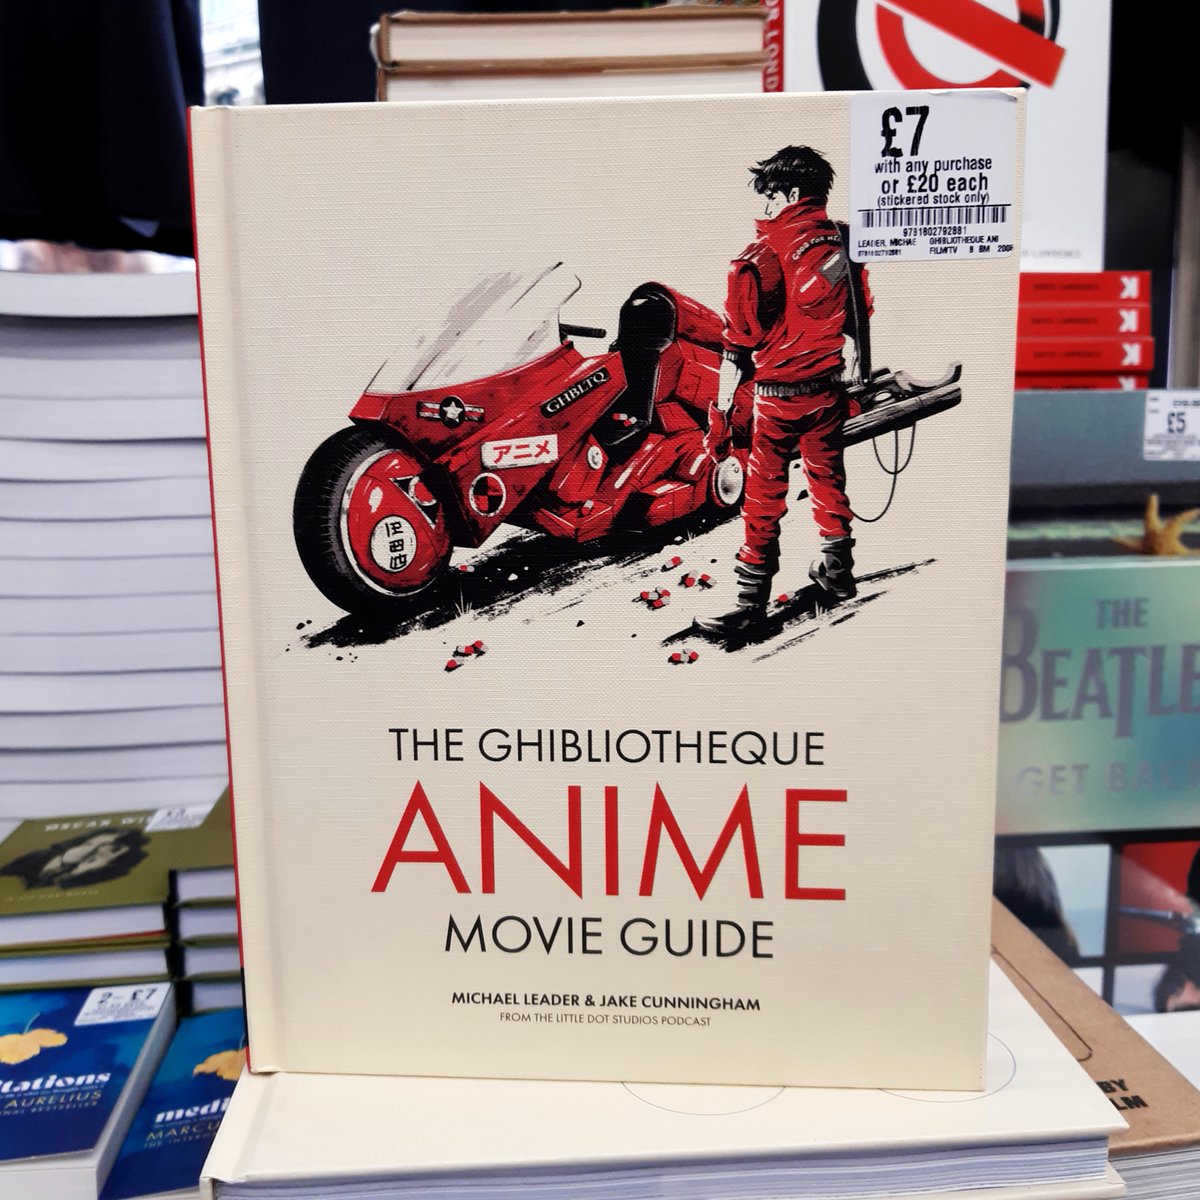 Join Jake Cunningham and Michael Leader, hosts of the acclaimed Ghilbiotheque podcast, as they review 30 of the best anime movies ever created, explaining why each is a must-see and detailing the intriguing stories behind their creation. In stock, just £7 with any purchase!